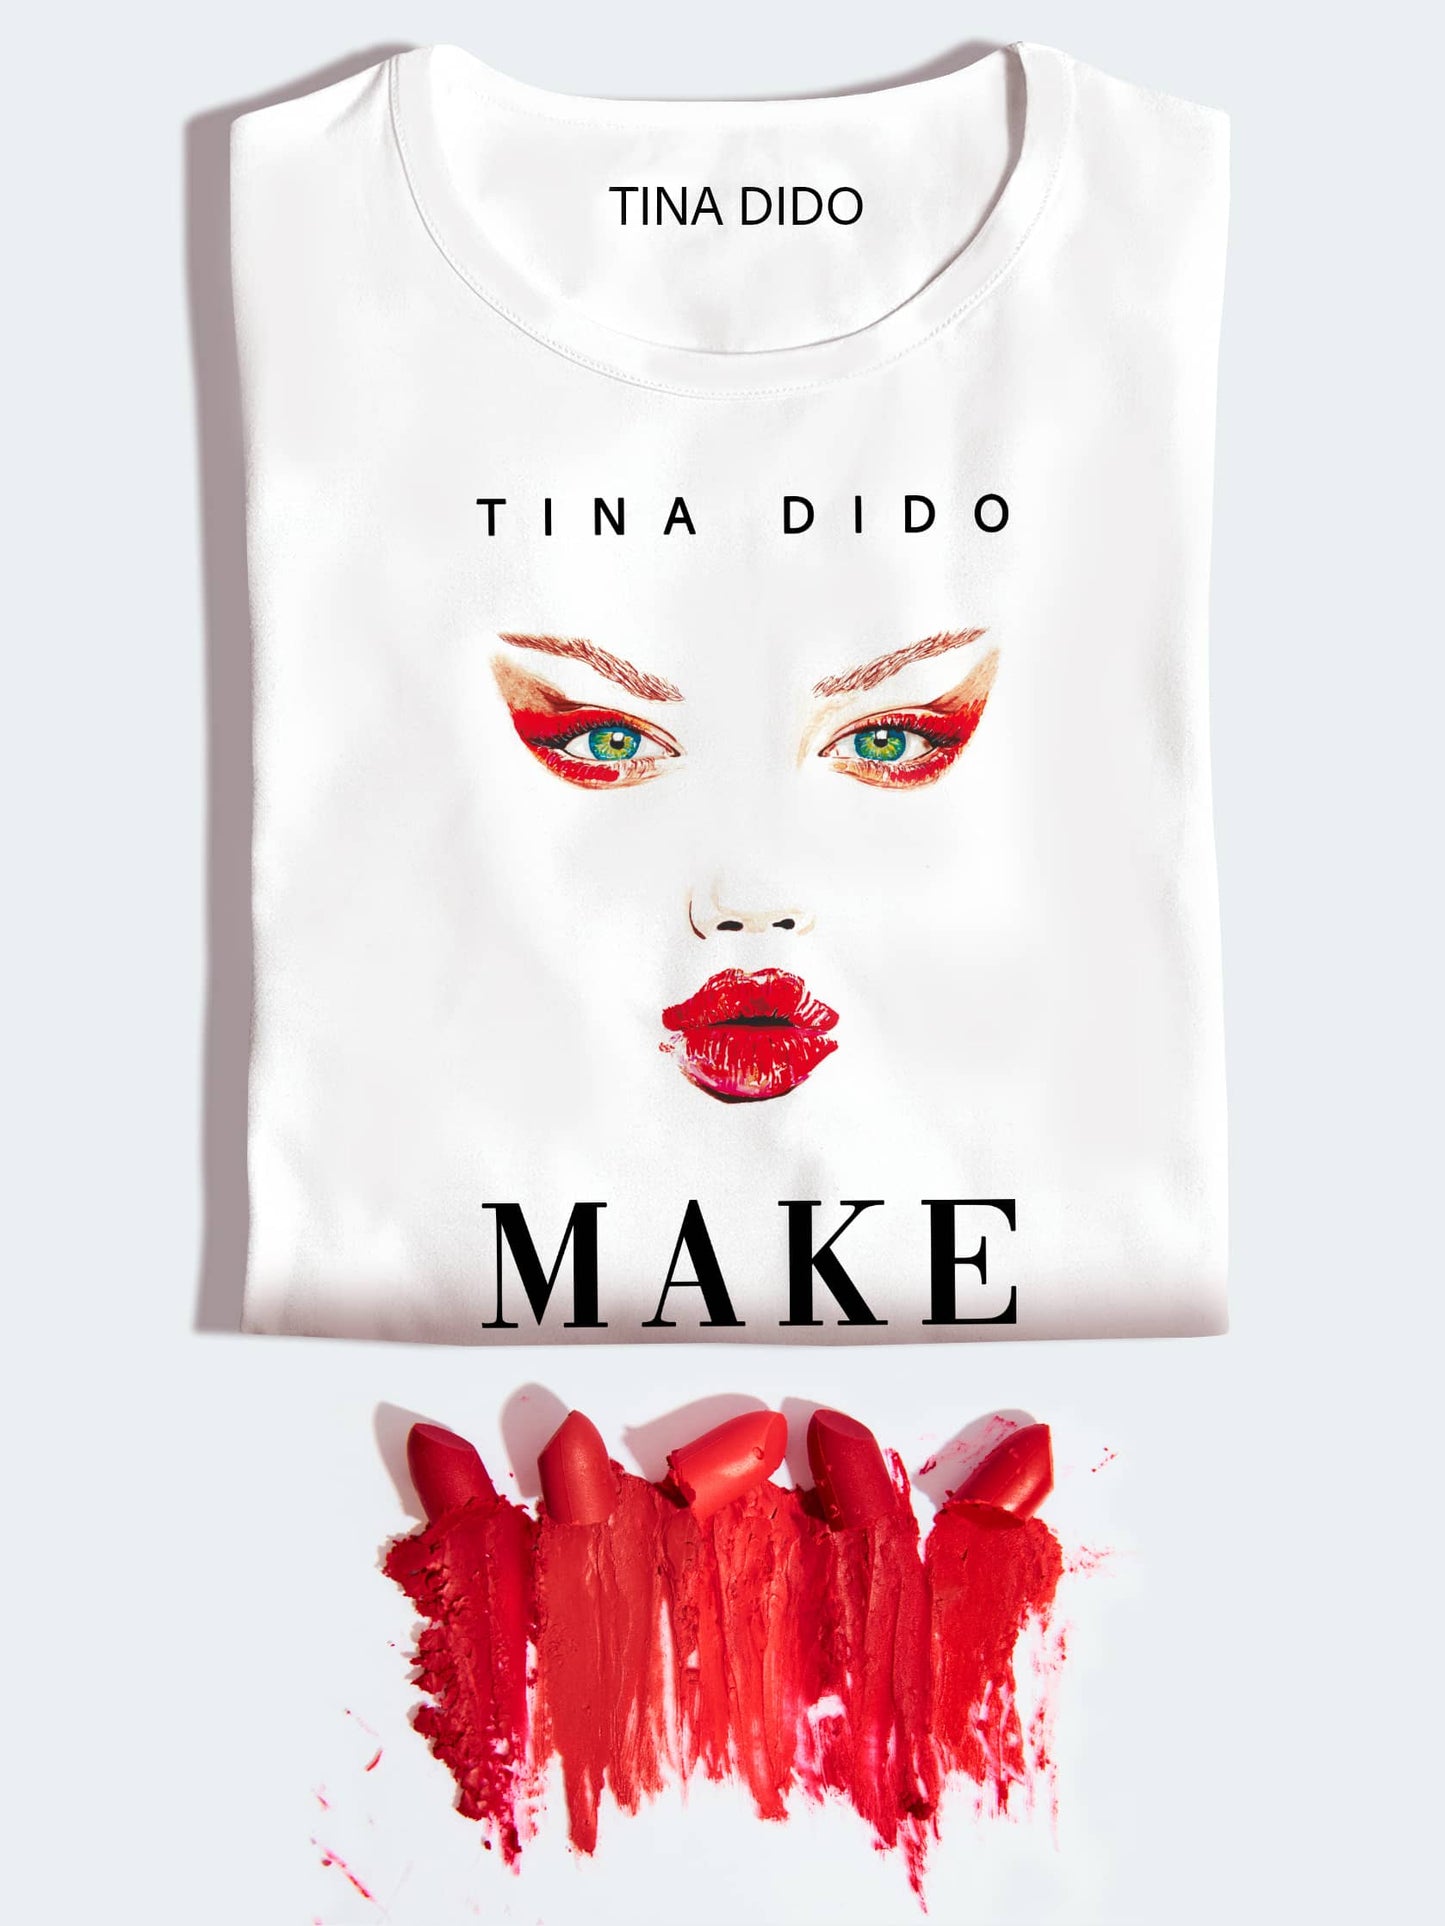 Premium Crafted Fashion T-Shirt With Lindsey Wixson Art By TINA DIDO